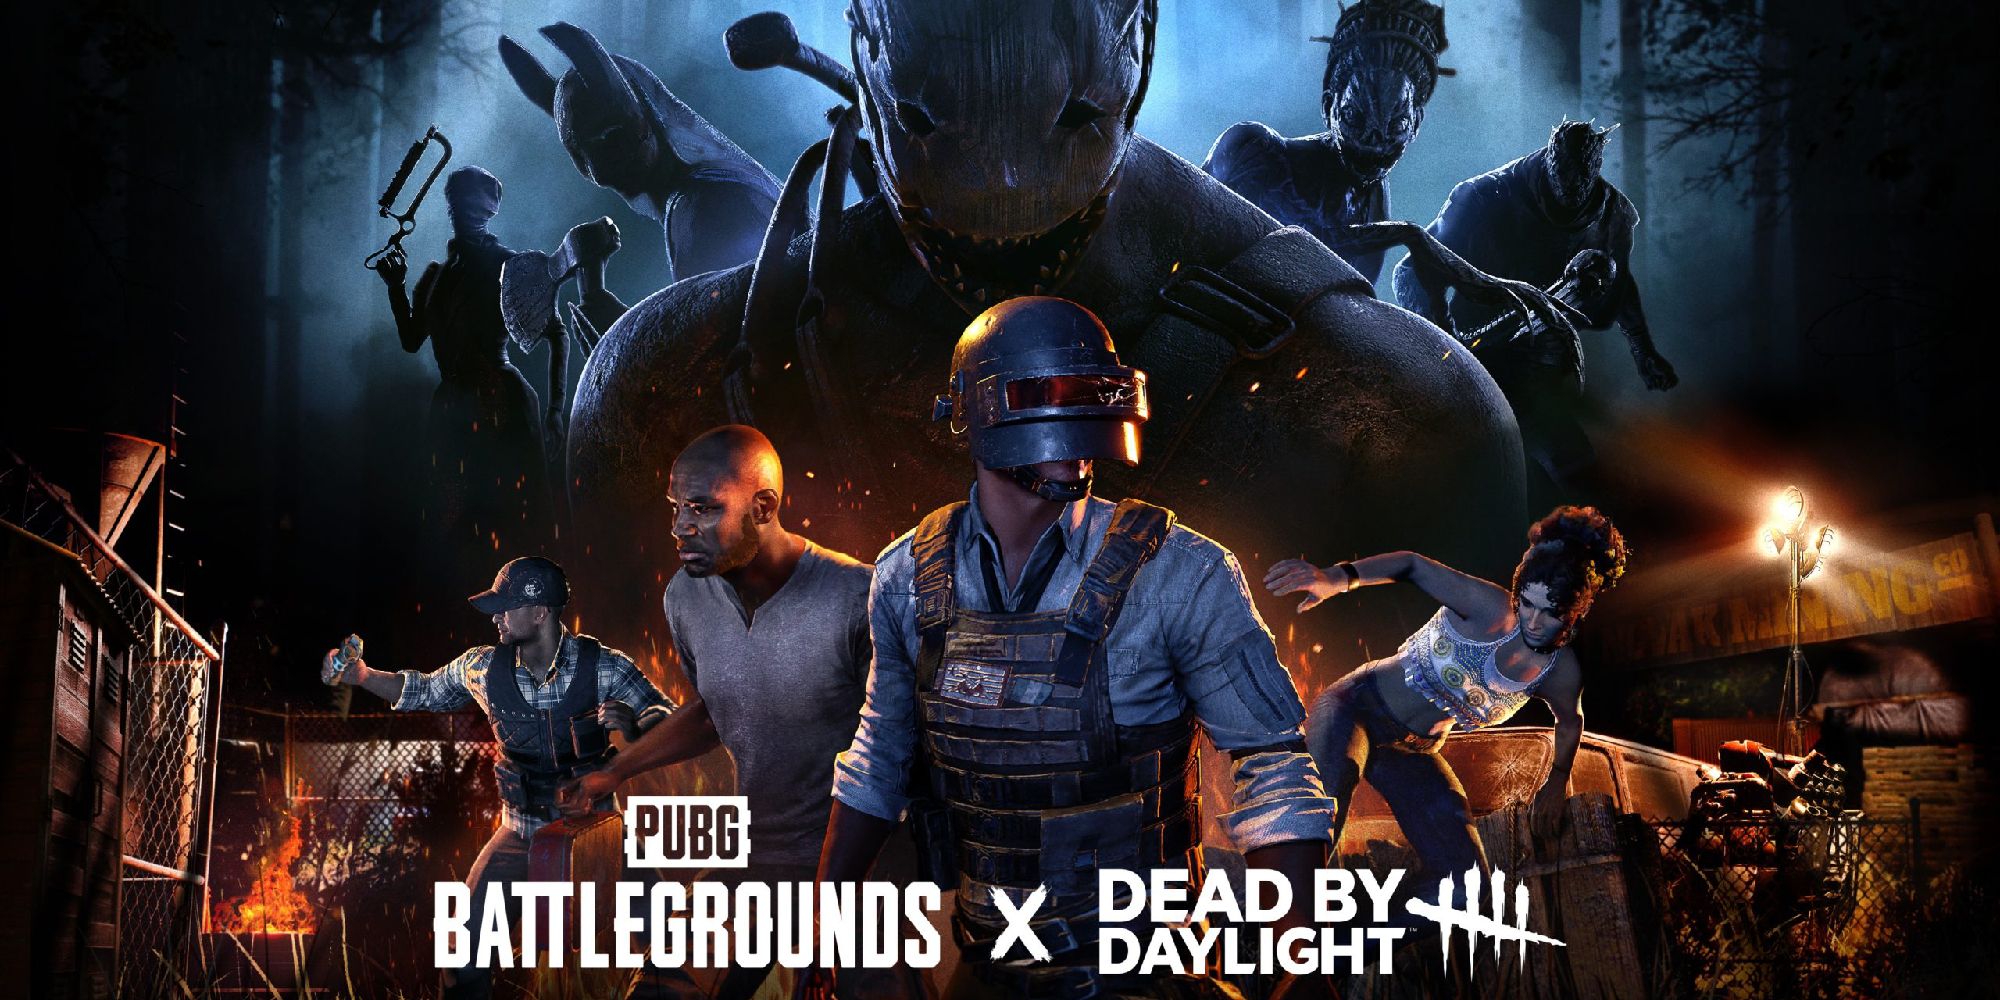 PUBG featured with iconic Dead By Daylight killers